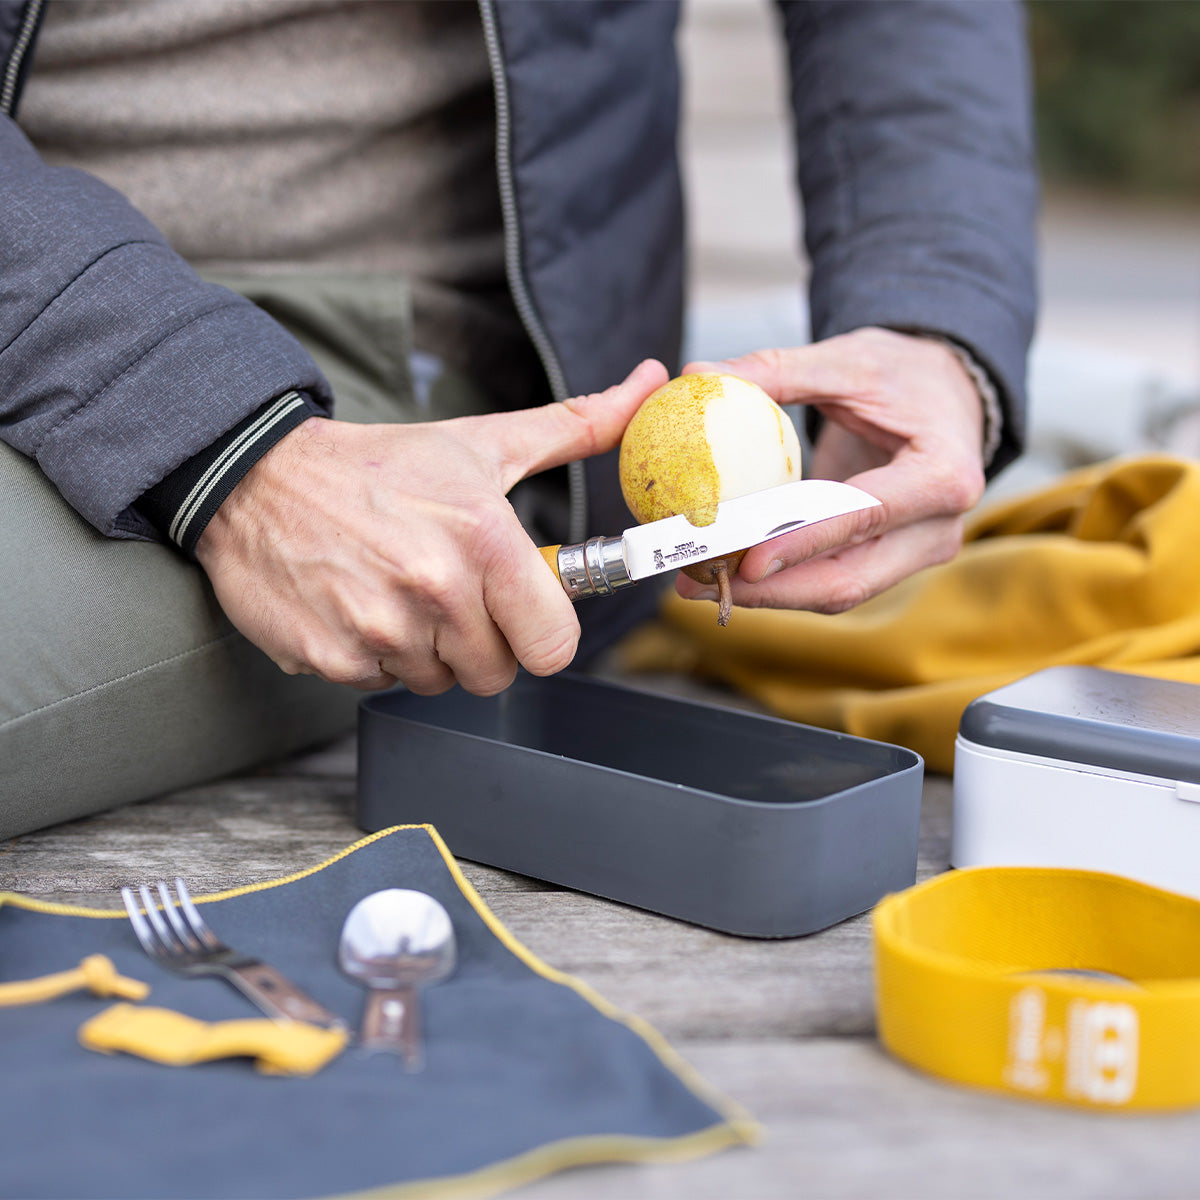 Opinel x Monbento | On-The-Go Meal Kit